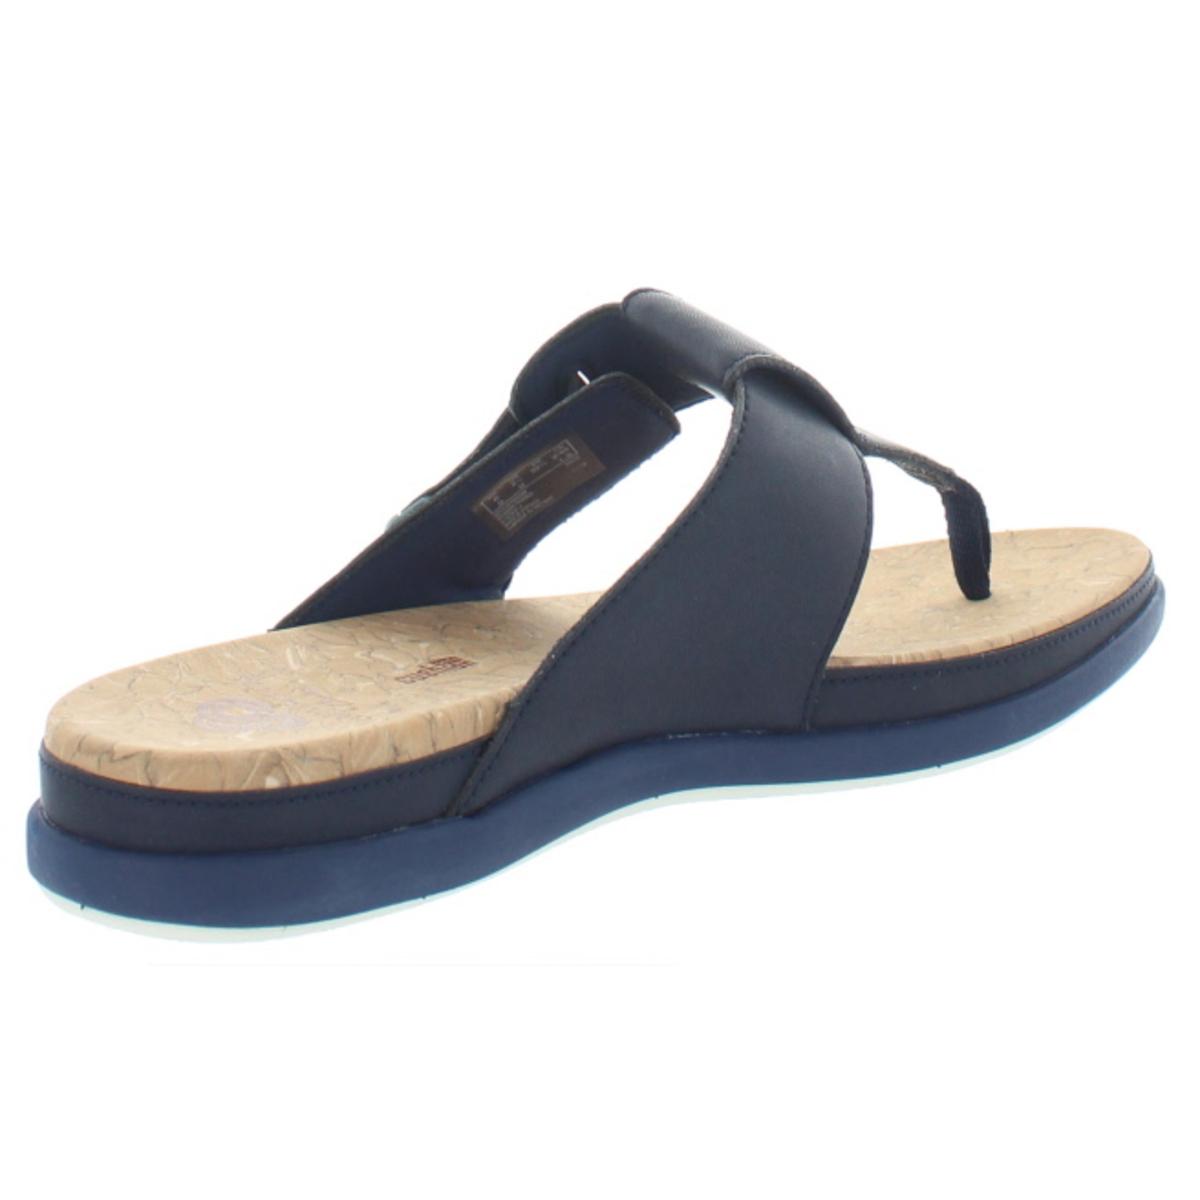 Cloudsteppers by Clarks Womens Step June Reef Navy Thong Sandals Shoes ...